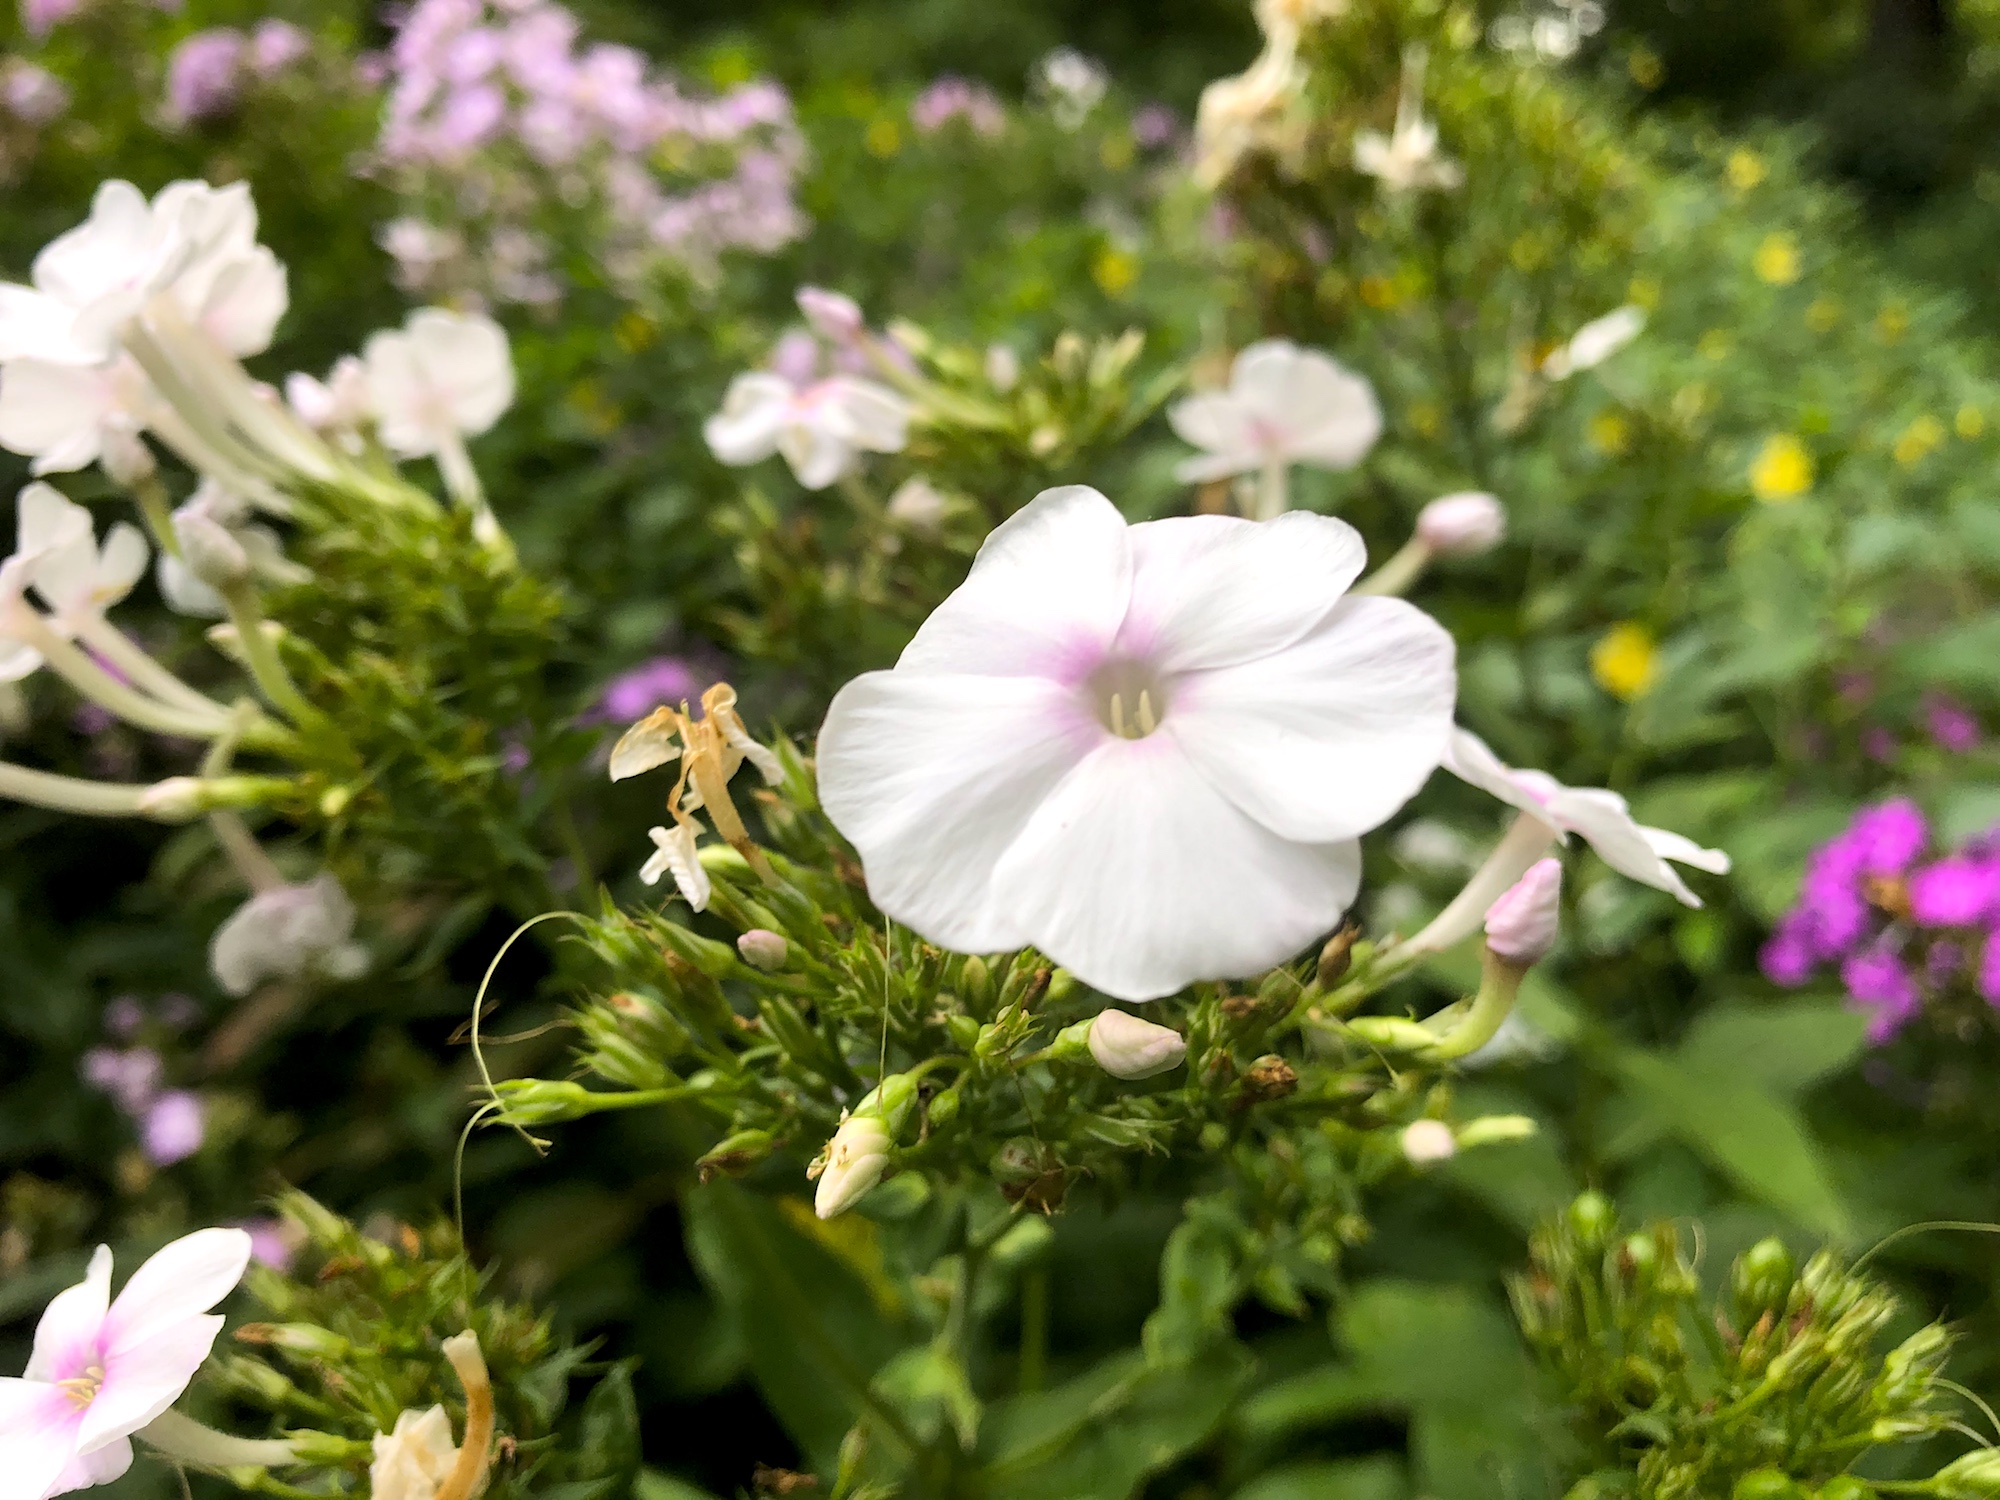 Tall Garden Phlox by Duck Pond on August 21, 2019.